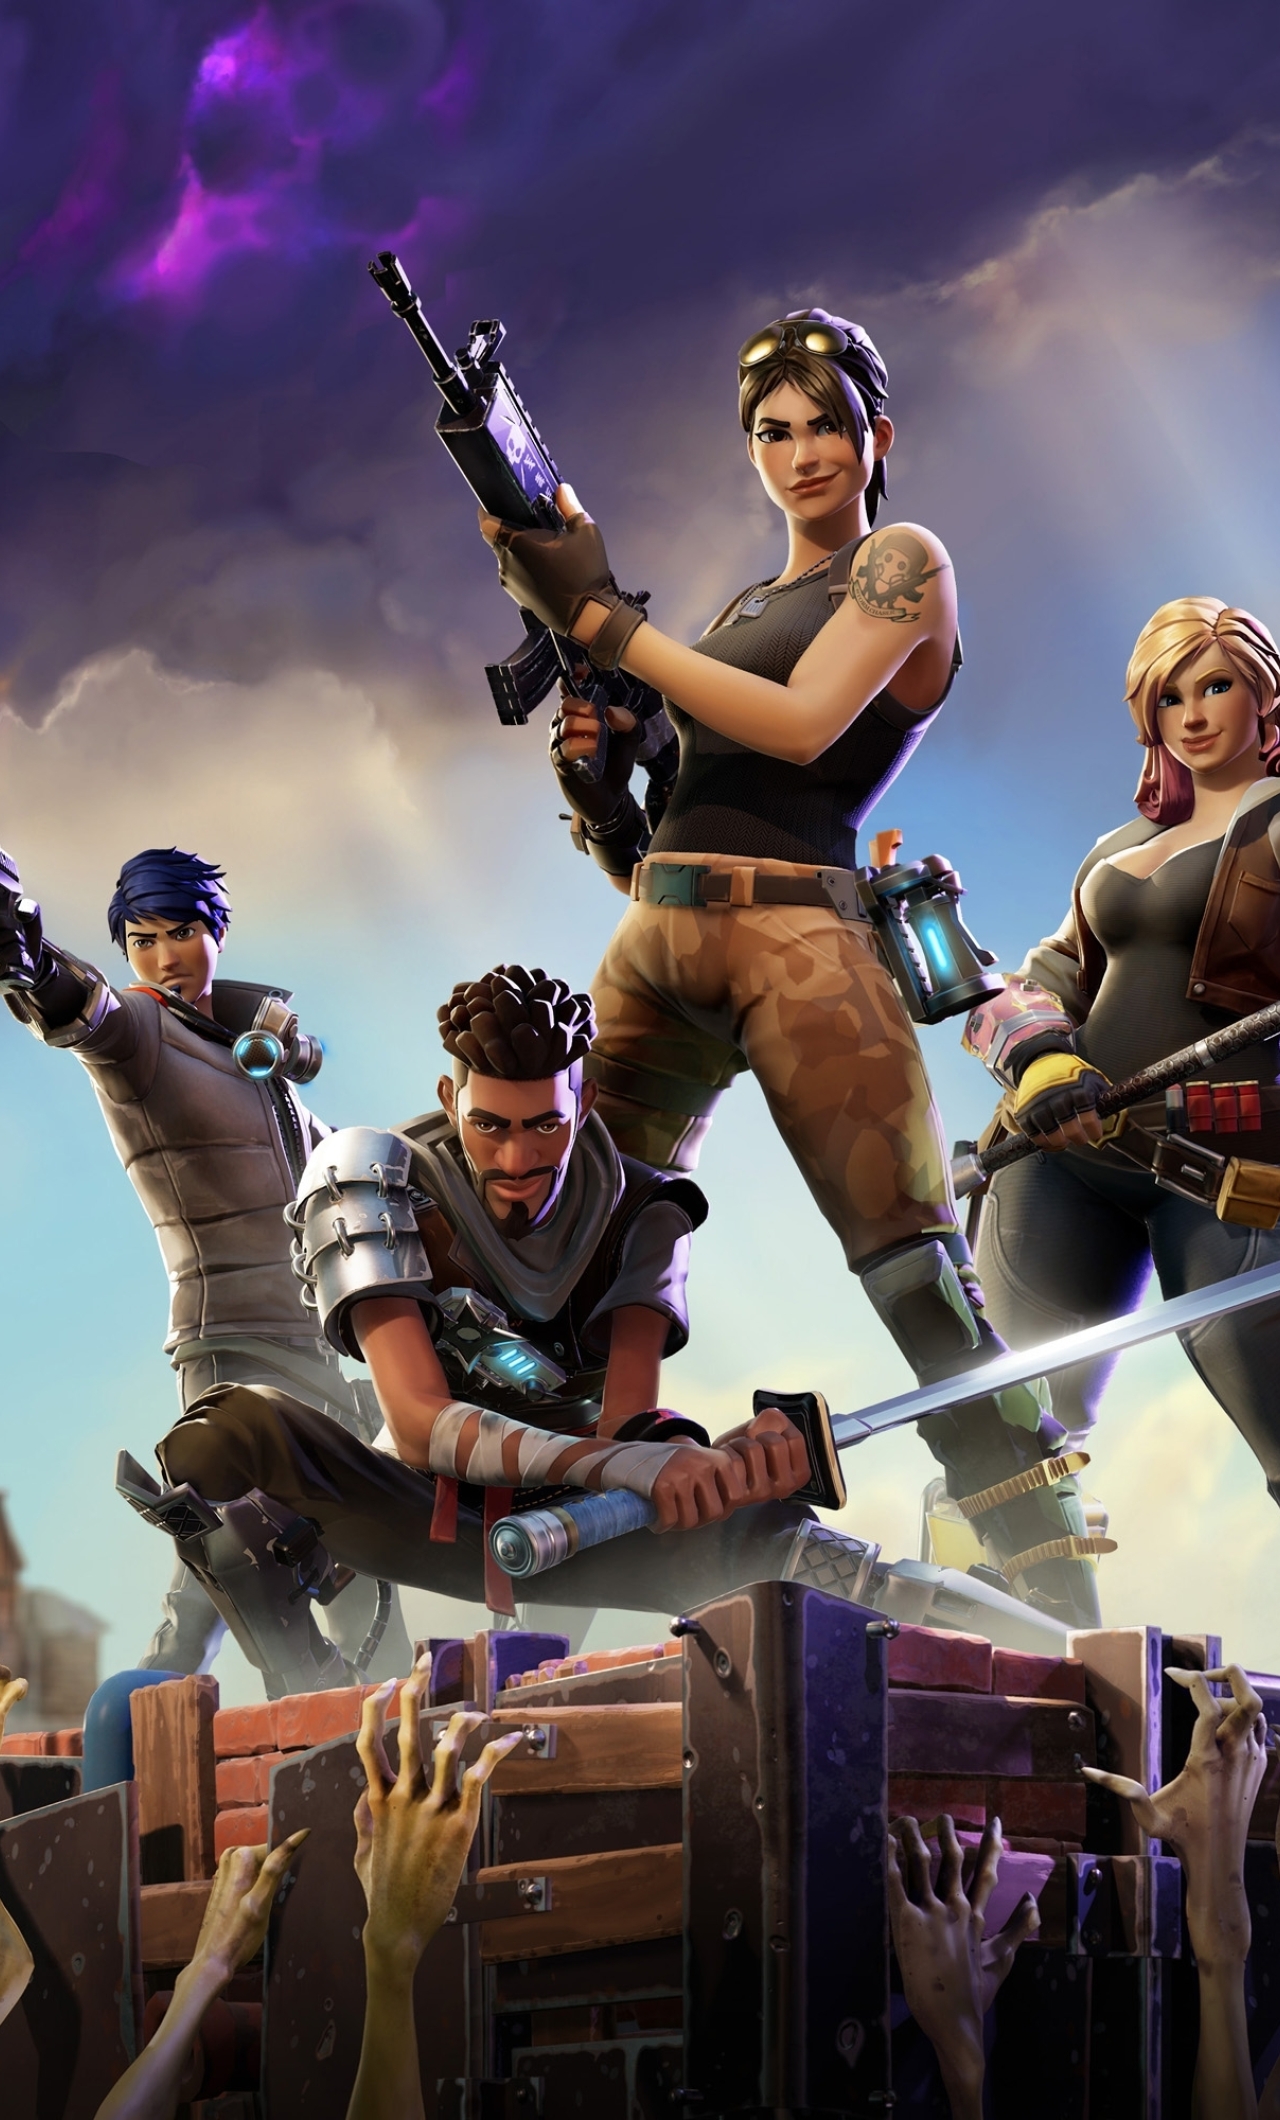 Download Fortnite Game Poster 1920x1080 Resolution, Full ...